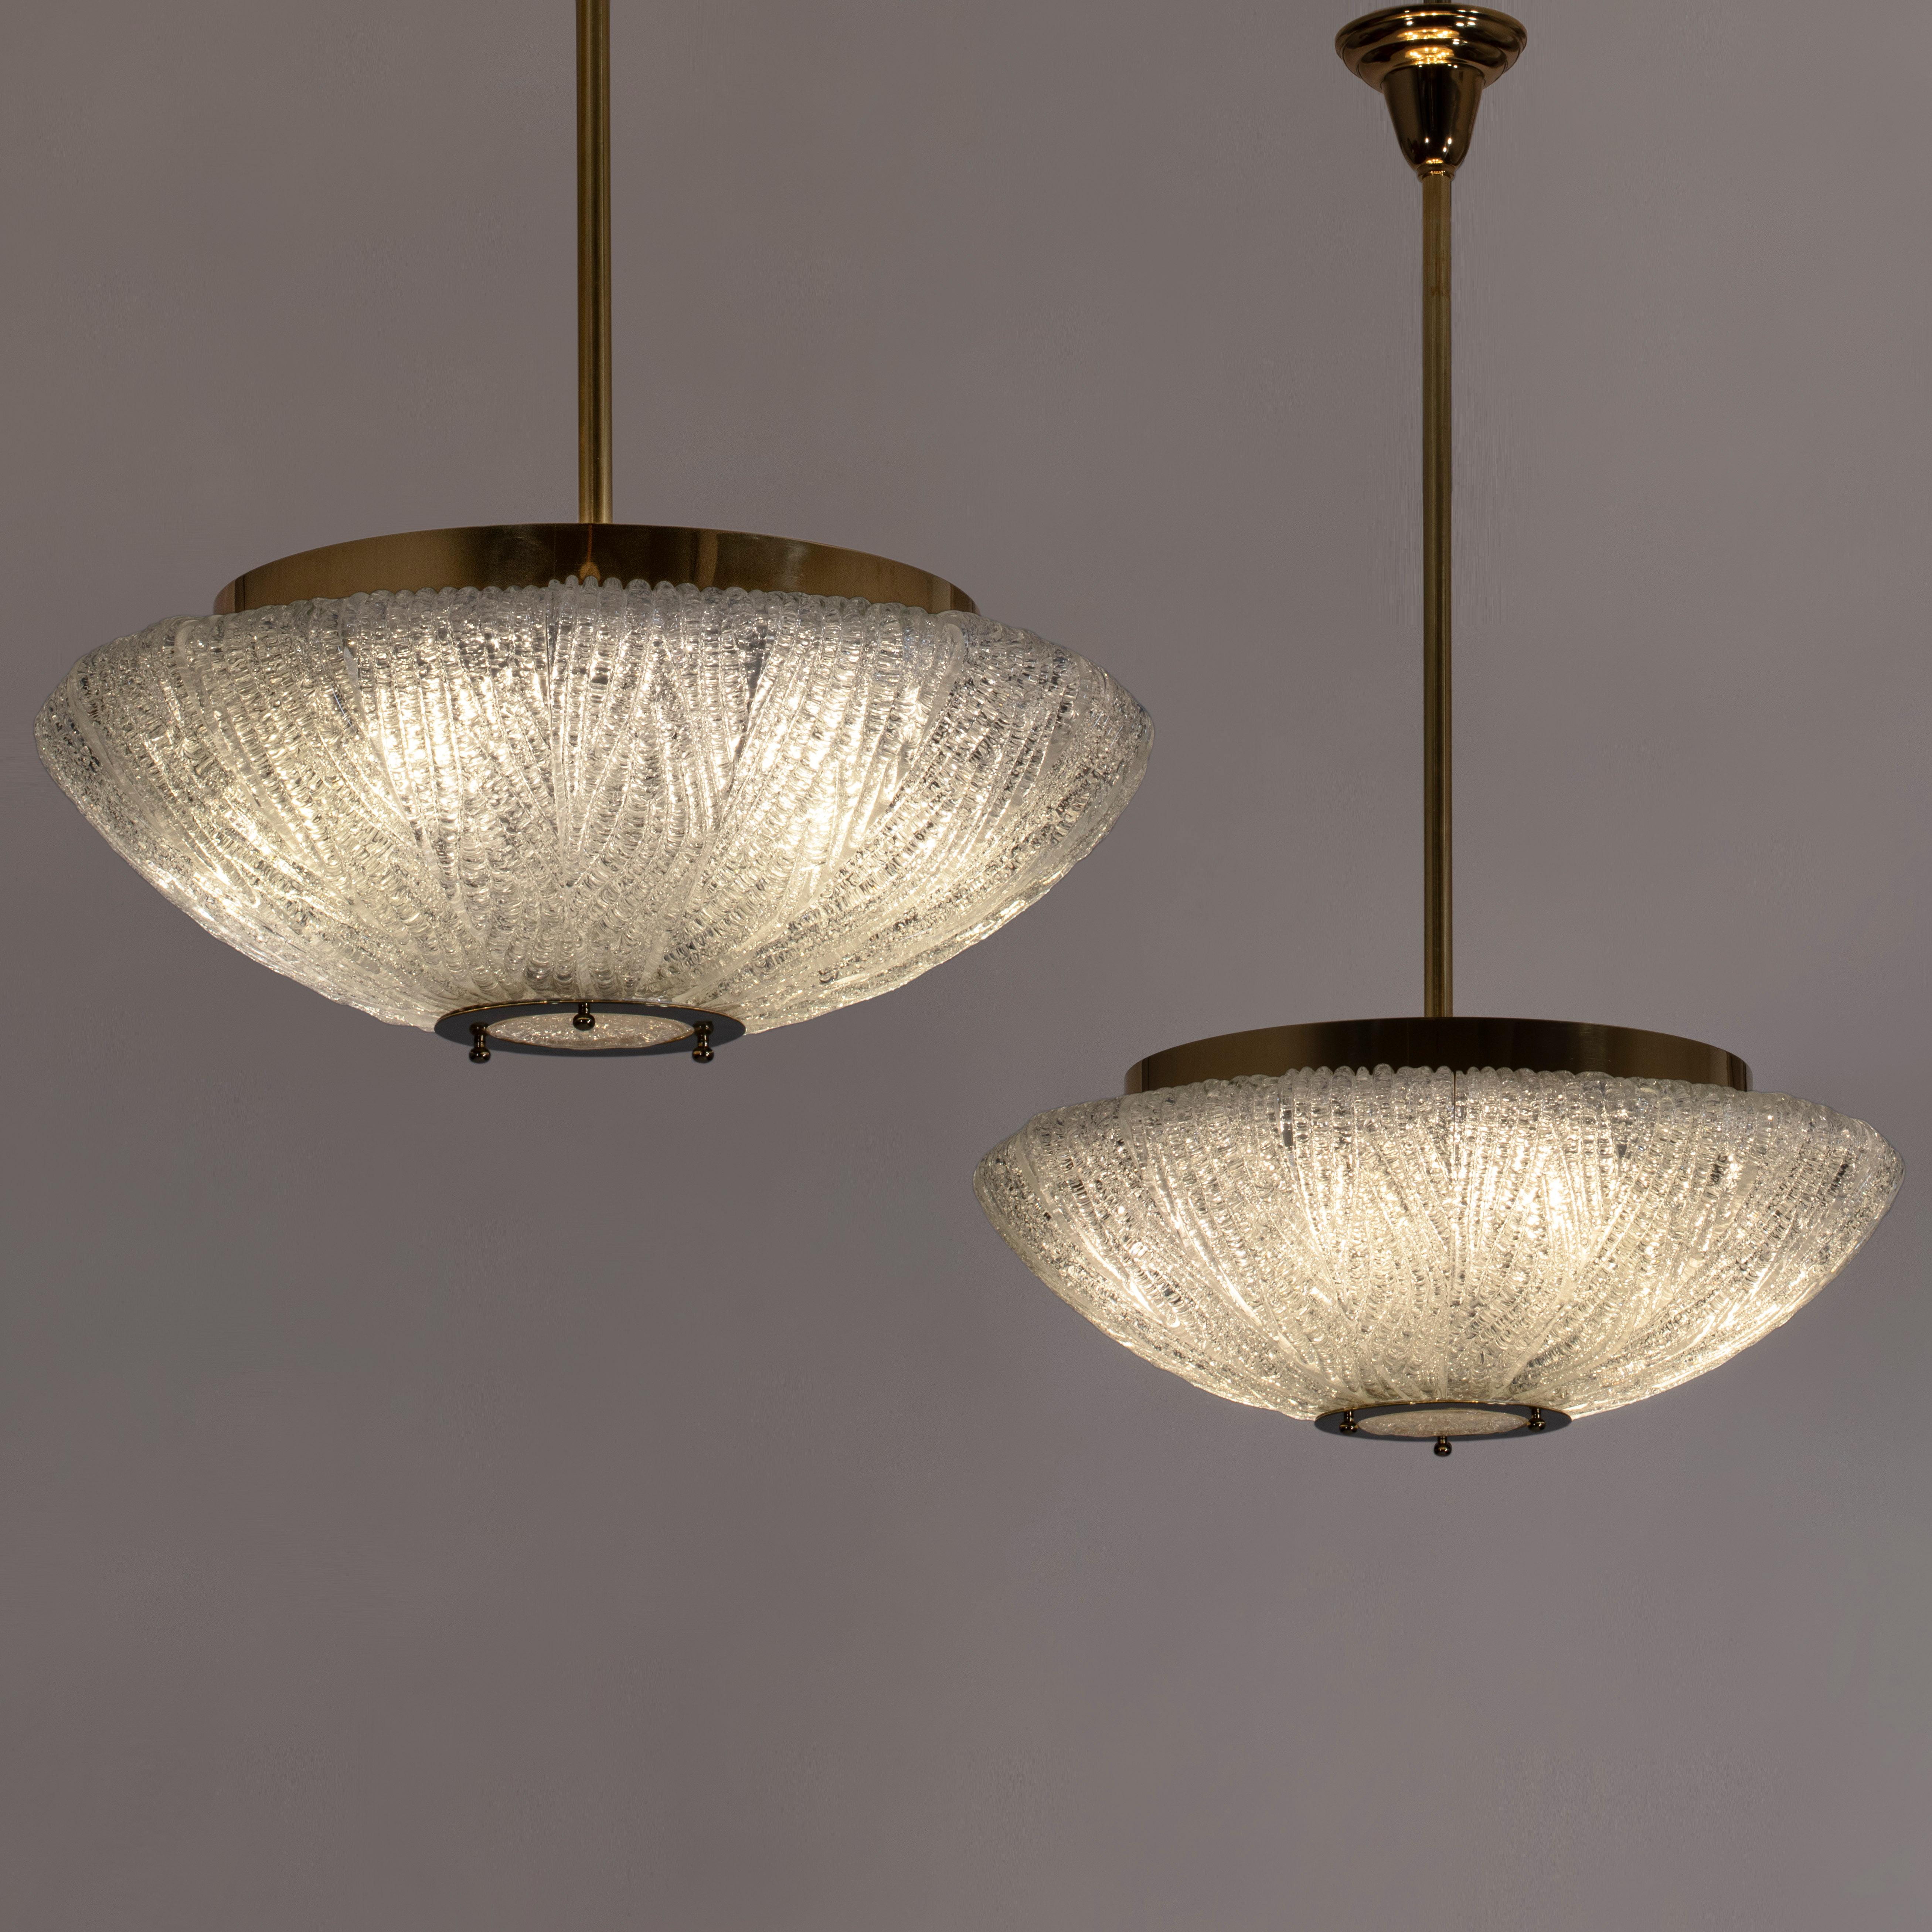 Each circular brass collar, surmounting a colorless Murano glass diffuser composed of rugiadoso glass segments, centering a circular glass medallion within a flat brass ring. 

The height can easily be adjusted. The fixtures can also be flush